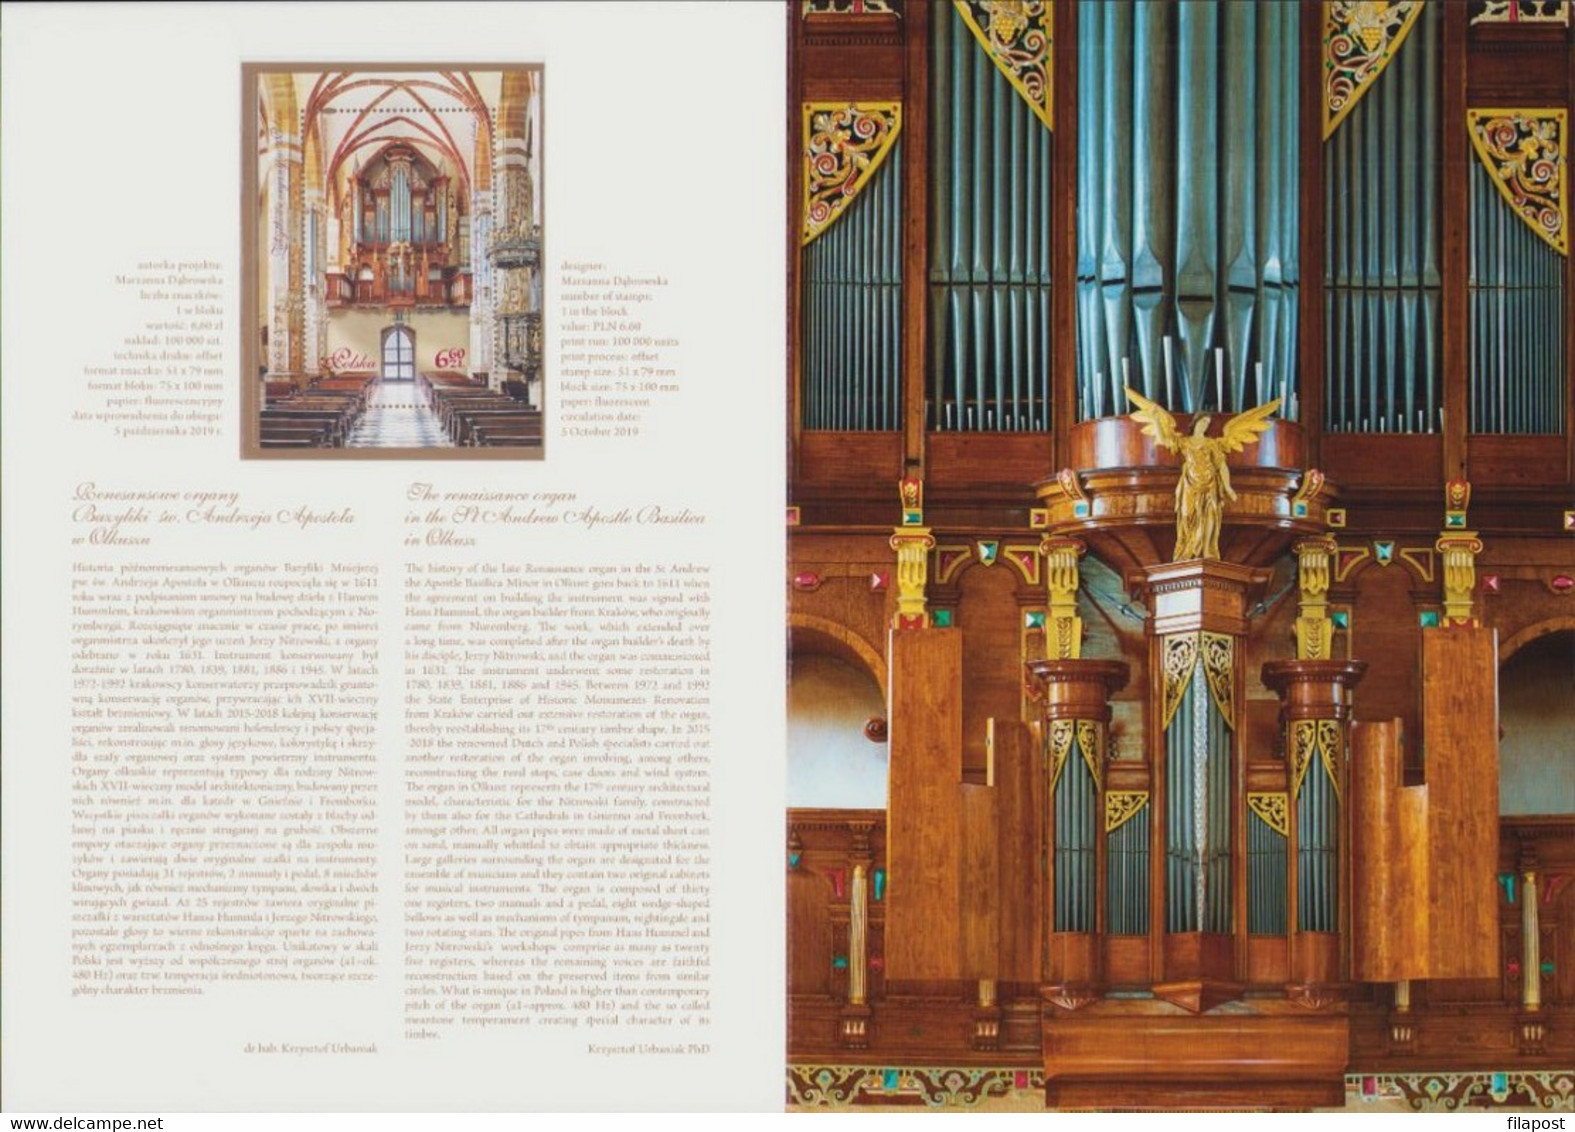 POLAND 2019 Booklet / Historic Renaissance Pipe Organ, St Andrew Apostle Basilica In Olkusz / With Block MNH** - Booklets